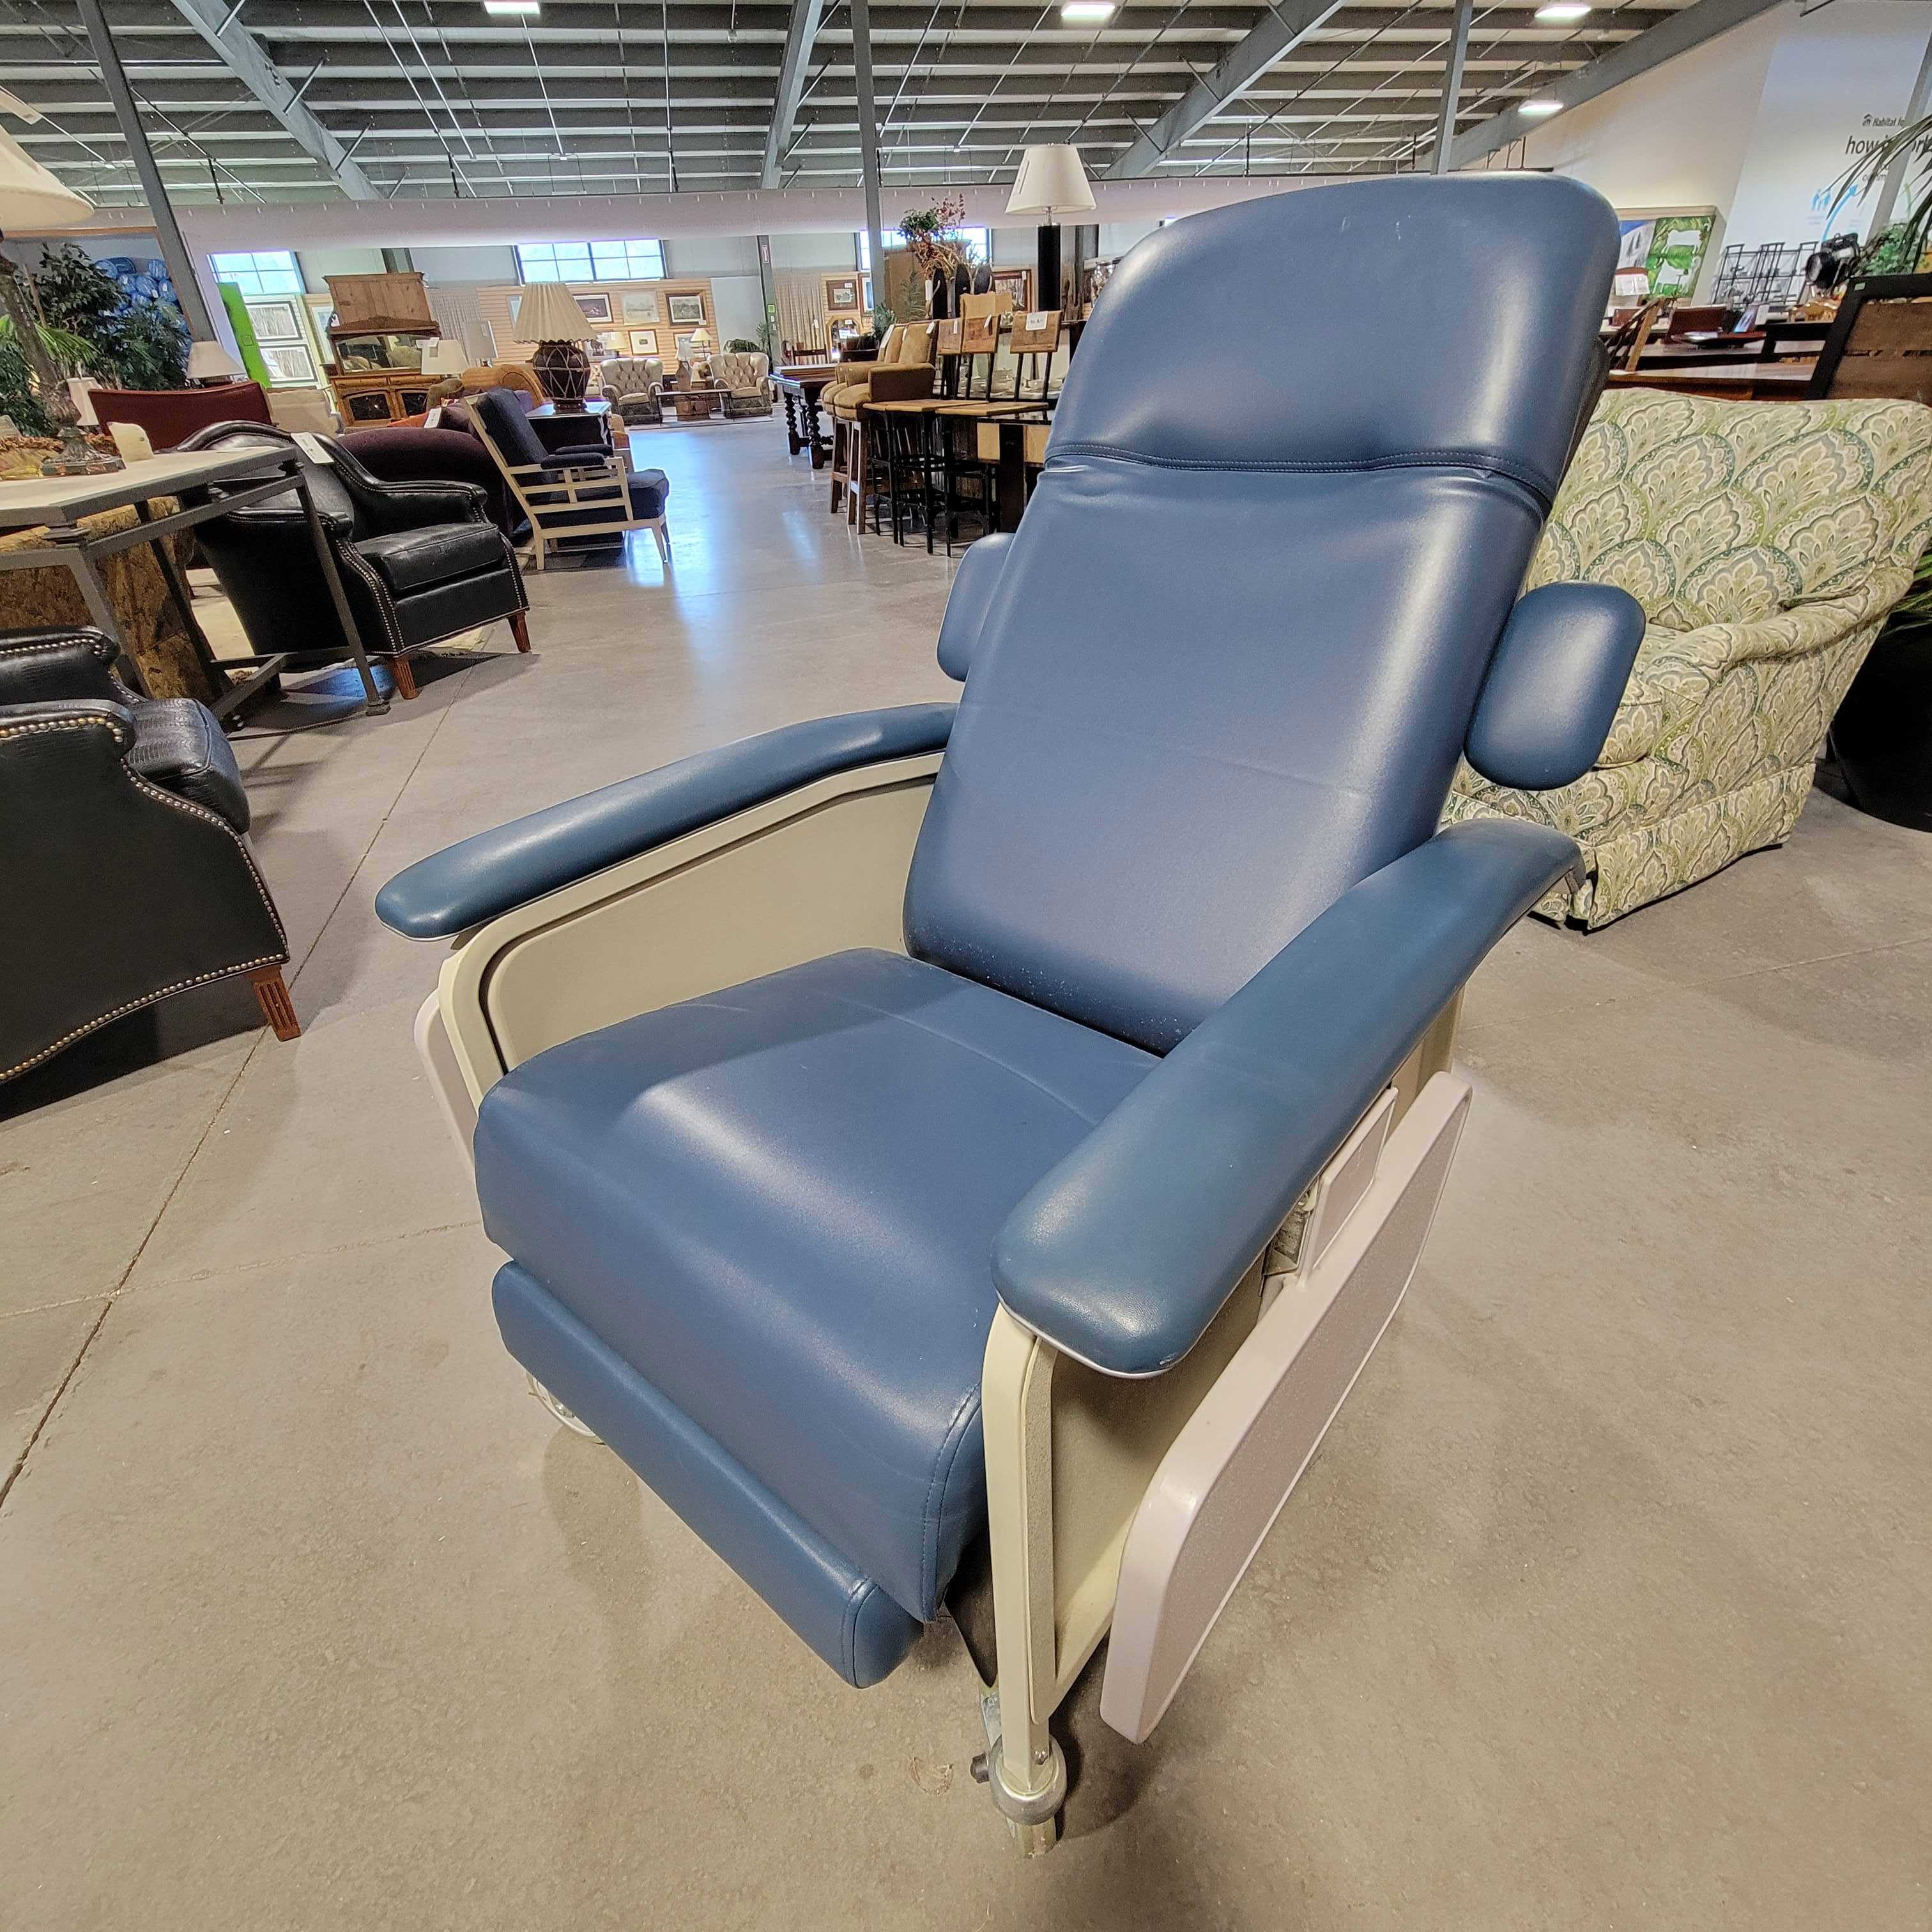 32"x 52"x 43" Drive Blue Medical Clinical Care Recliner